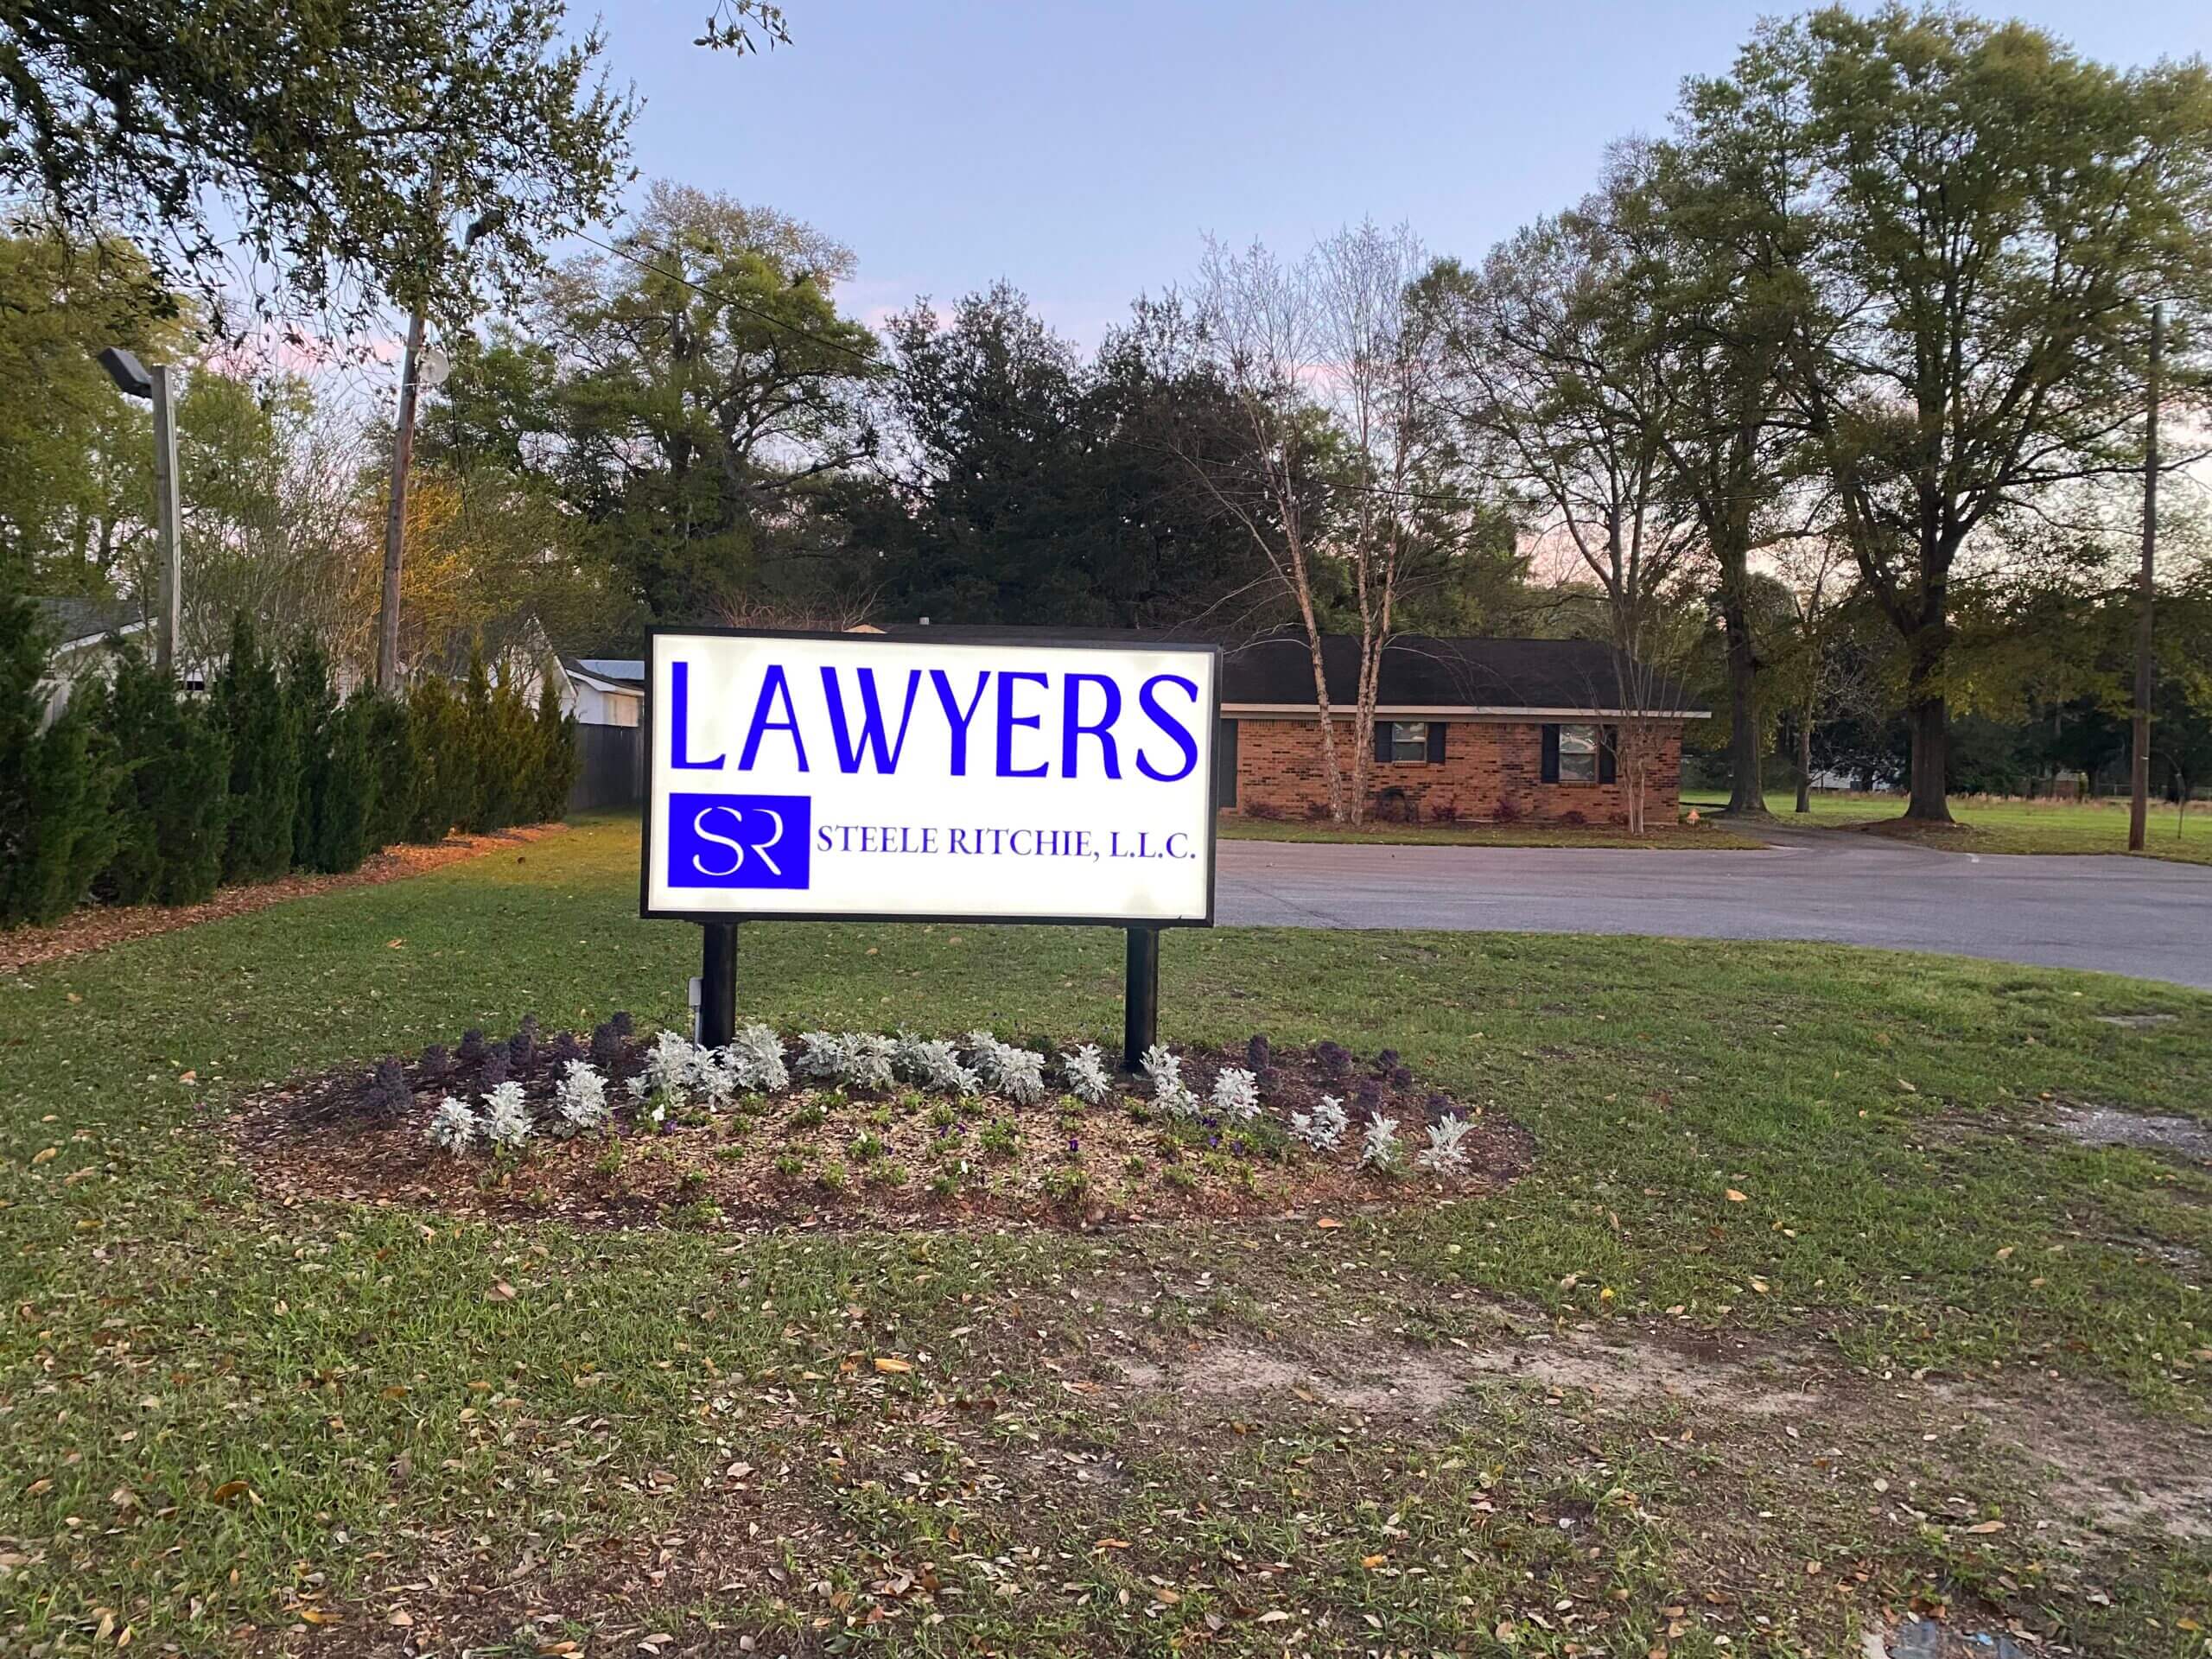 Personal injury lawyers sign in Mobile